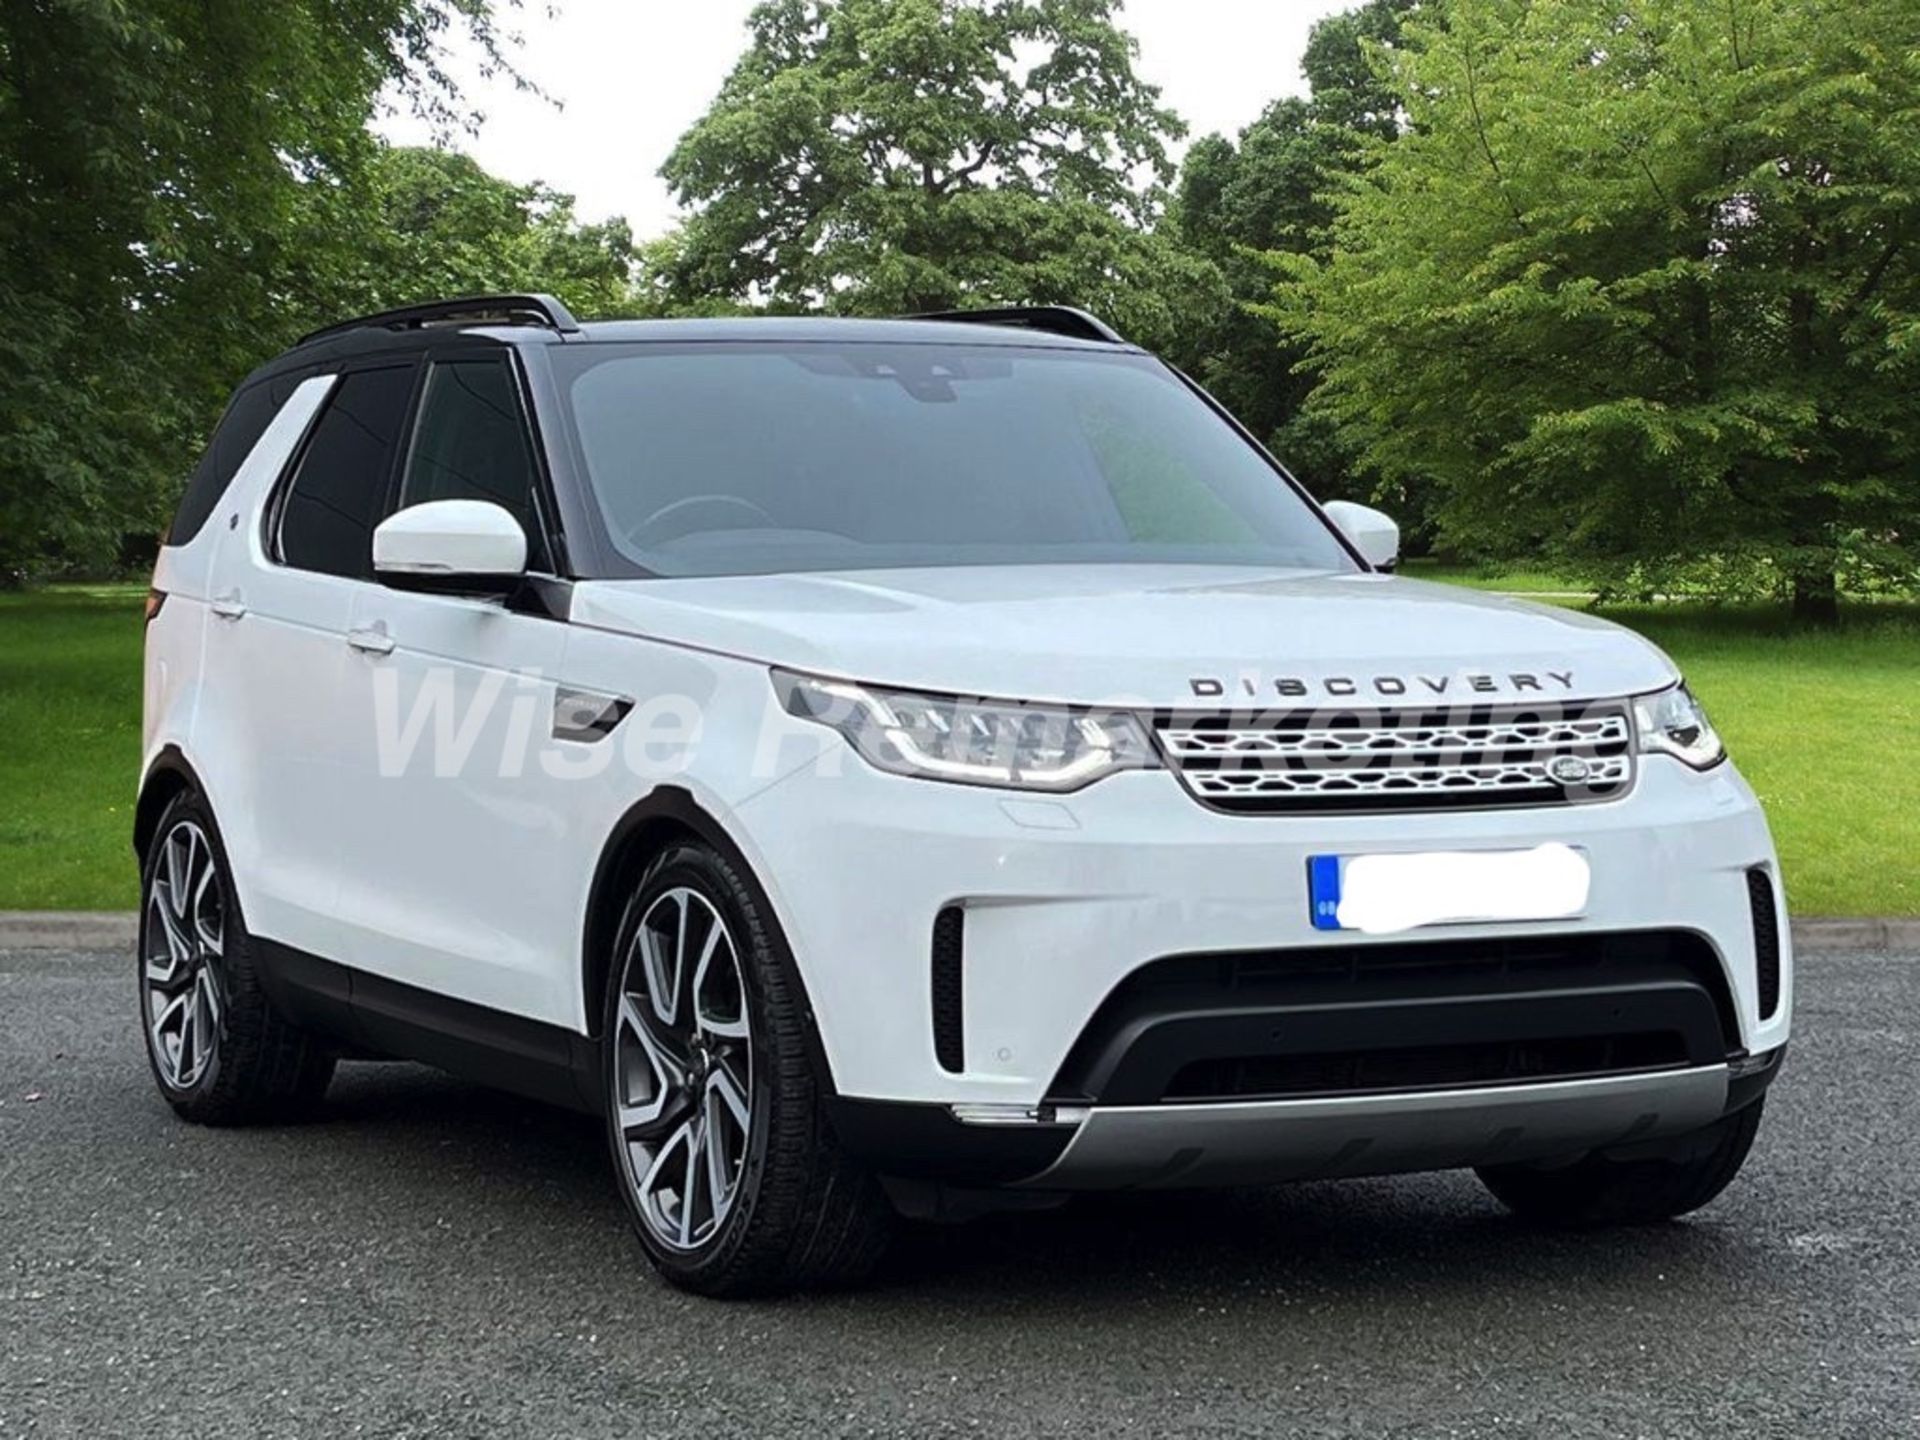 Land Rover Discovery 5 * SUV* (2017 - 67 Reg) *3.0 TD6 - 8 Speed Automatic* (ALL NEW MODEL)